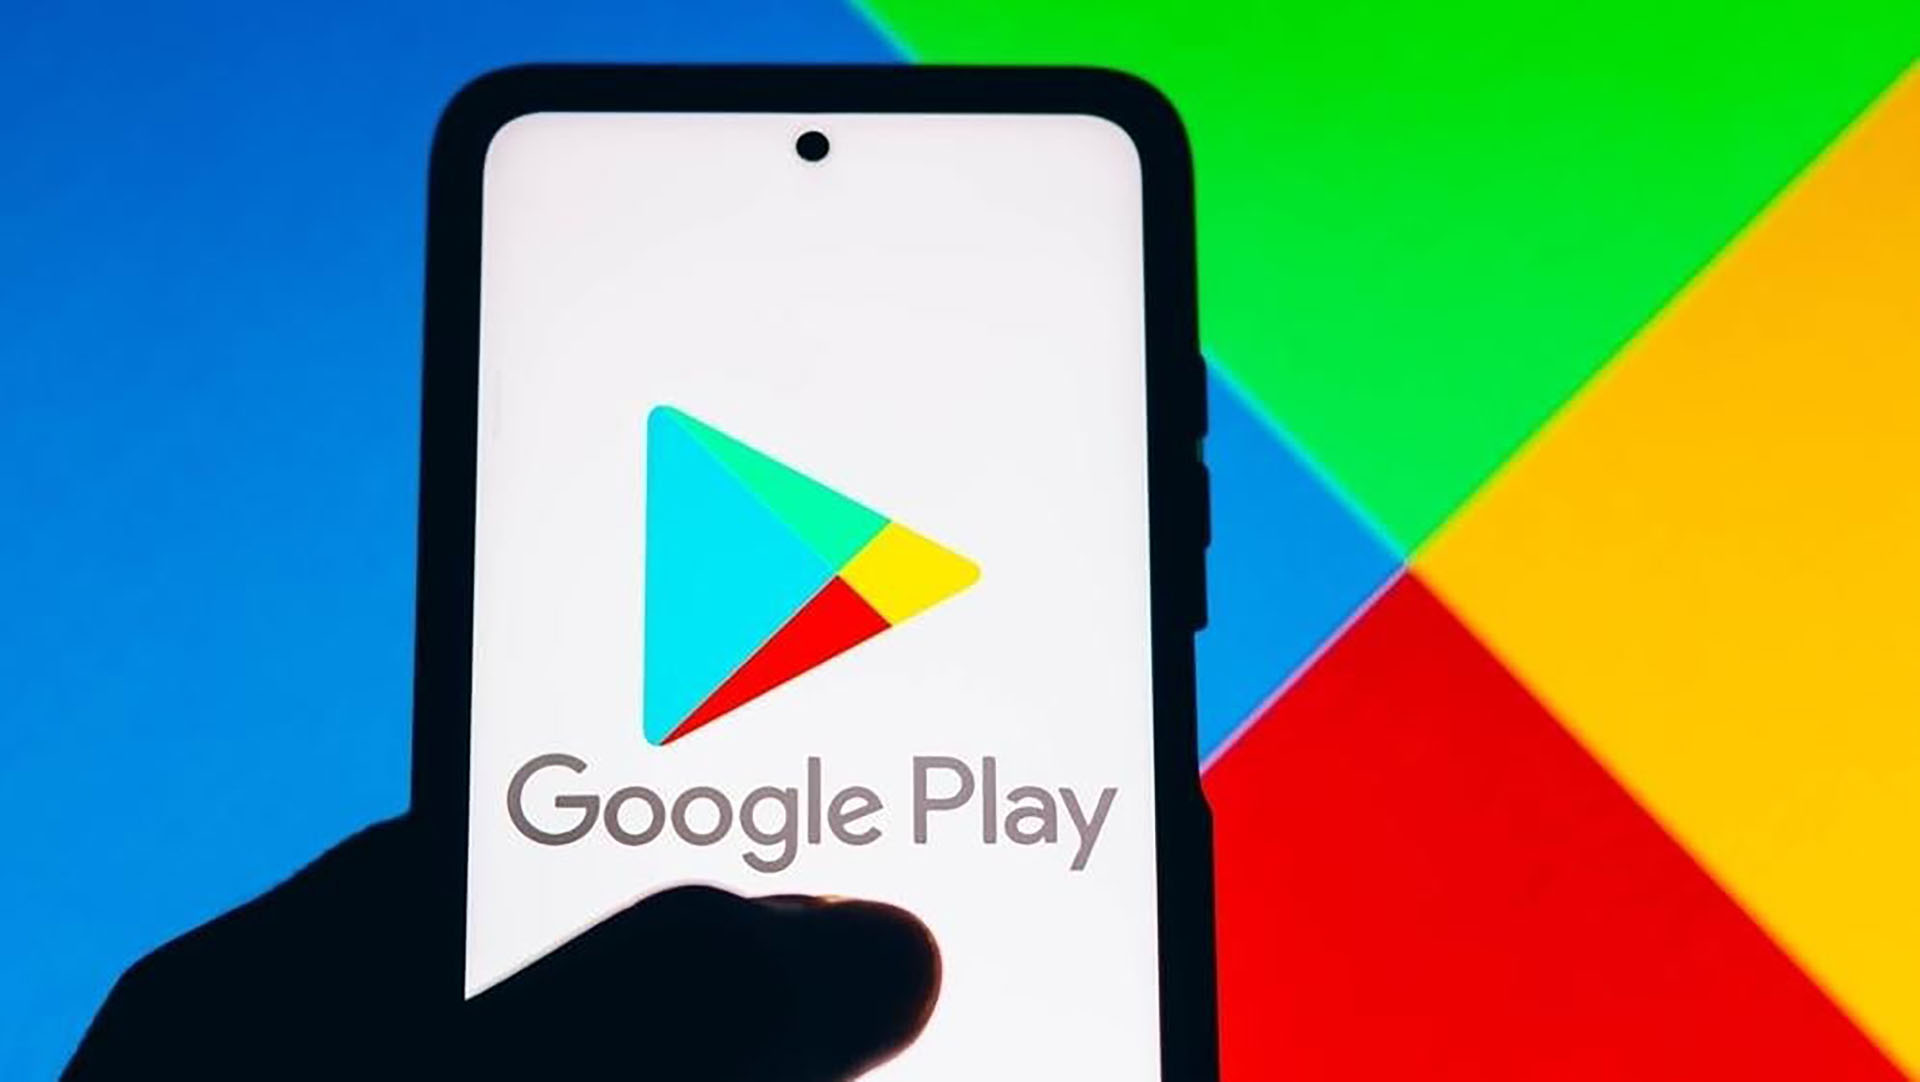 Image of smartphone with Google Play on the screen holding